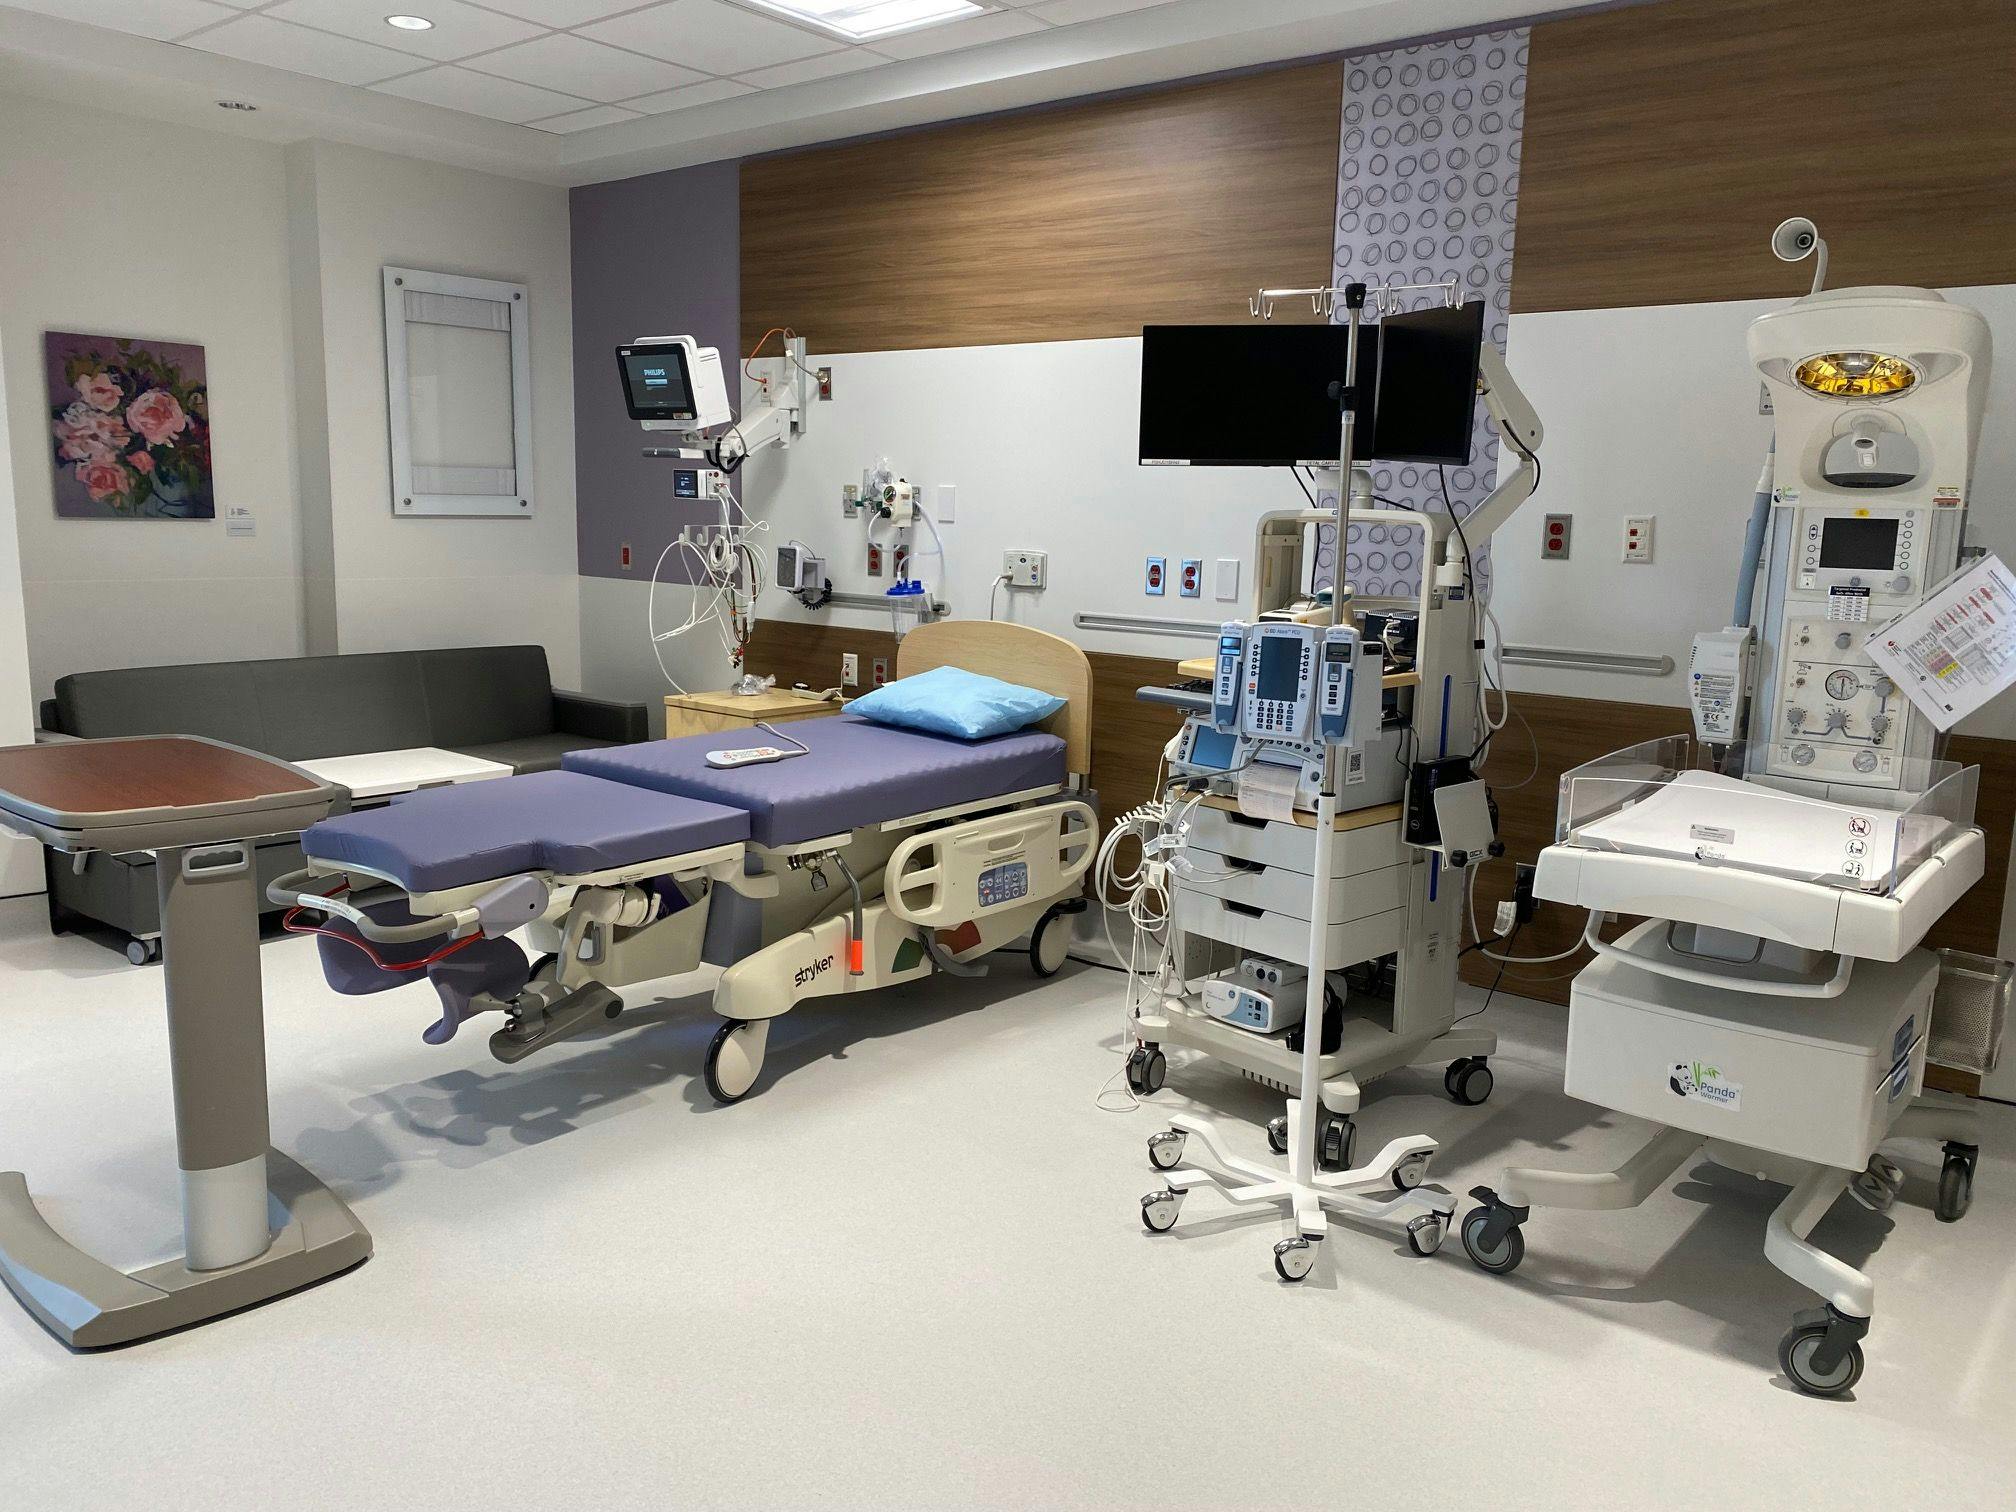 Penn State Health Lancaster Medical Center is offering large, spacious rooms in its maternity unit. The new hospital began accepting patients Monday, Oct. 3, but the women's services is slated to open in November.